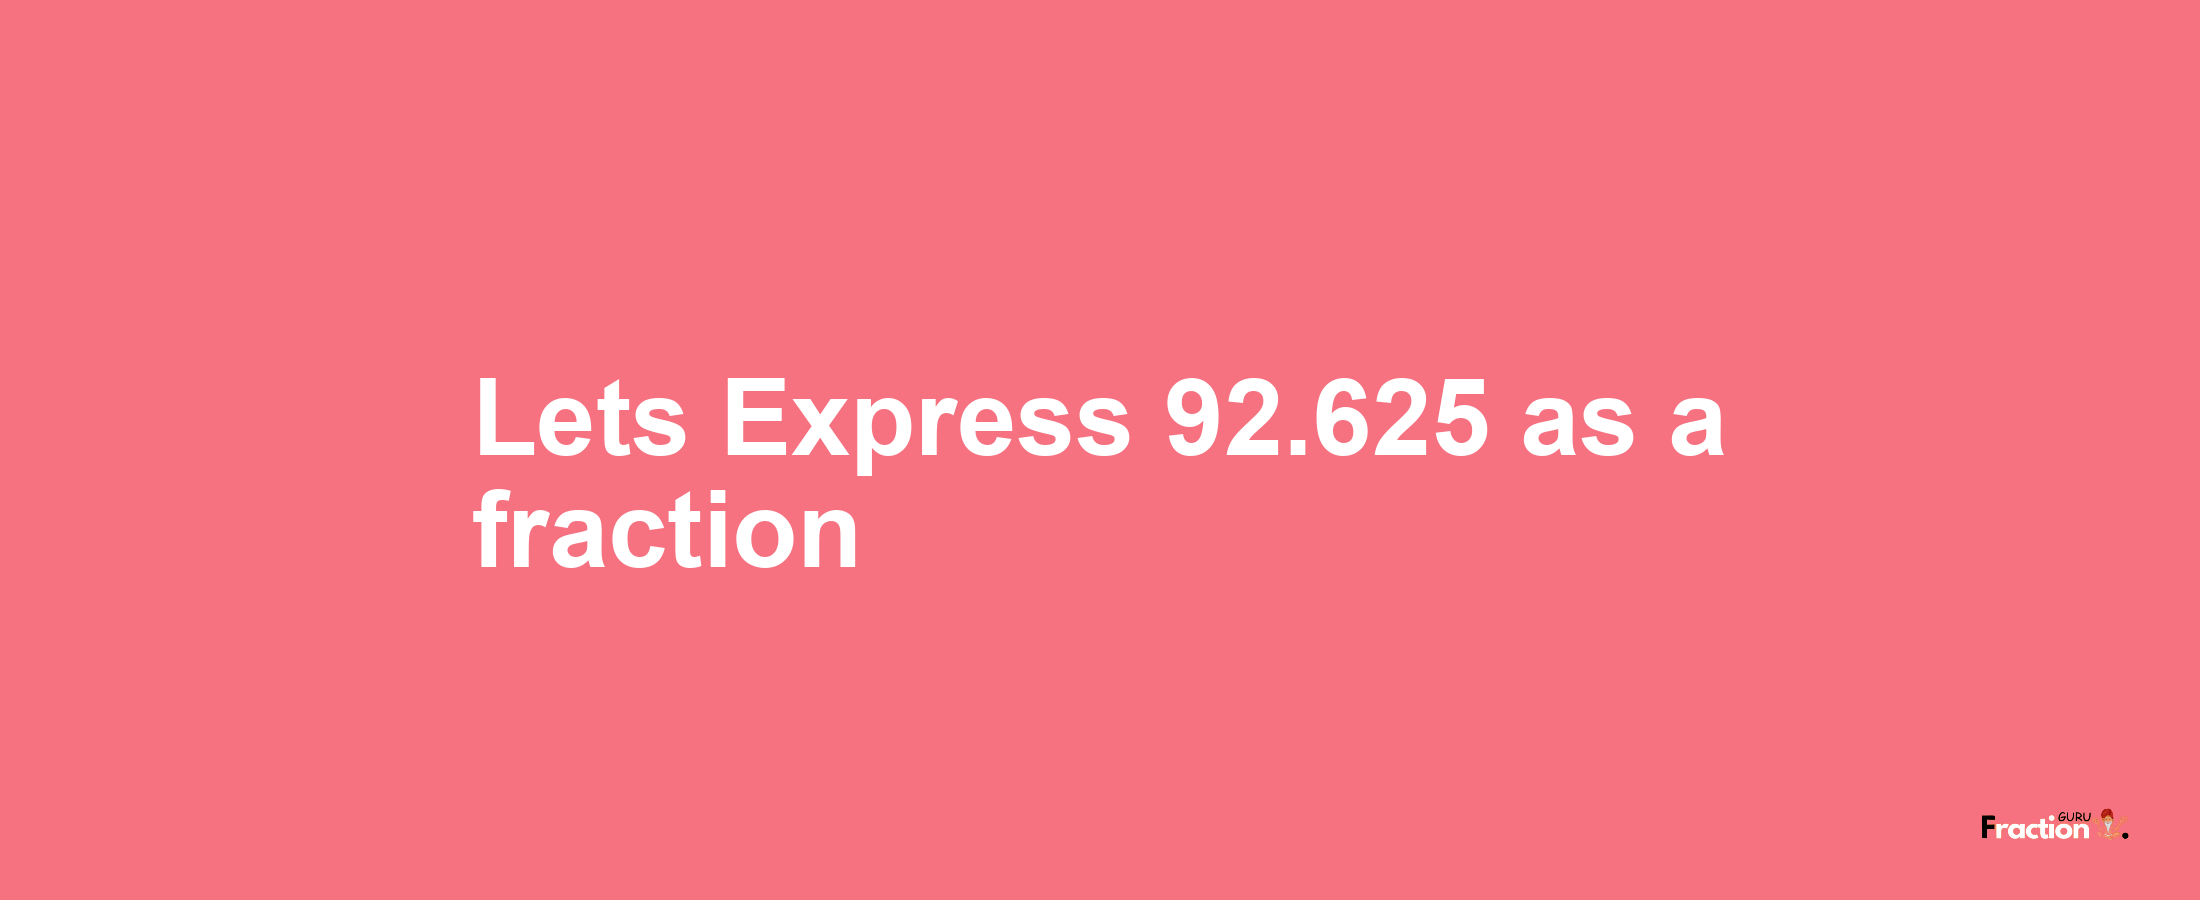 Lets Express 92.625 as afraction